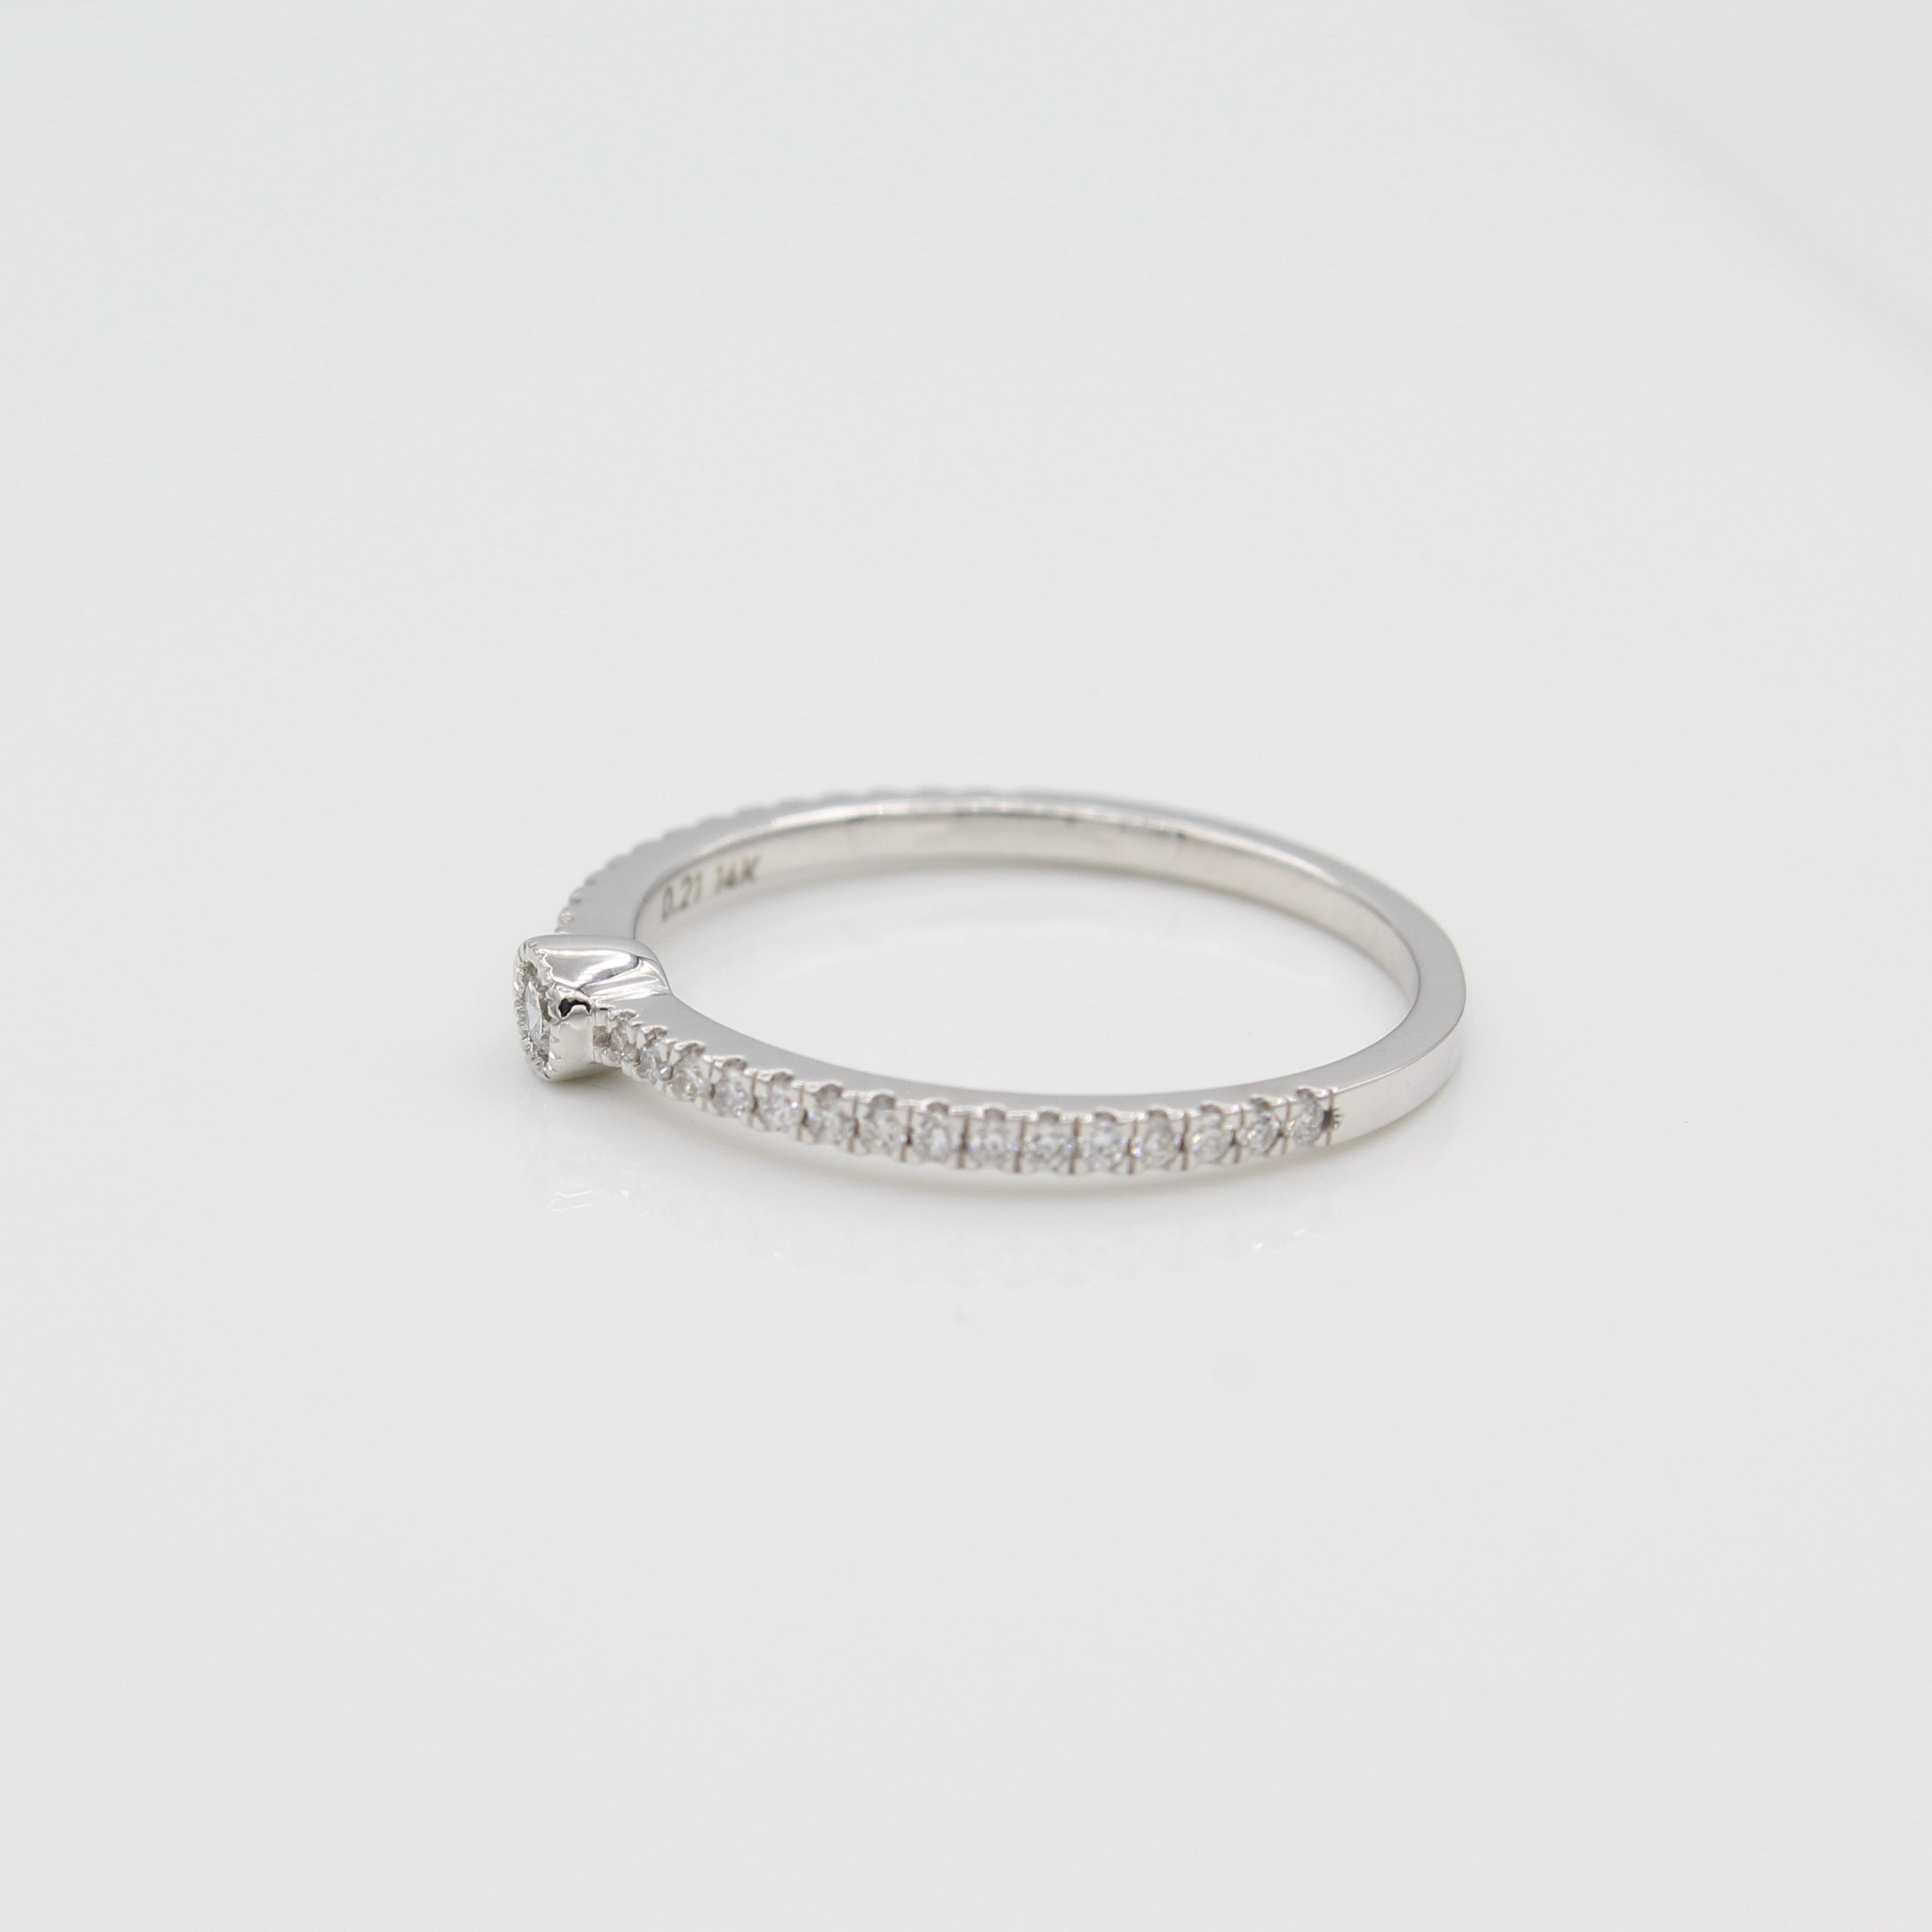 14k White Gold Single Bezel-Set Diamond Station Ring with Micro-Pave Band, side view from right.